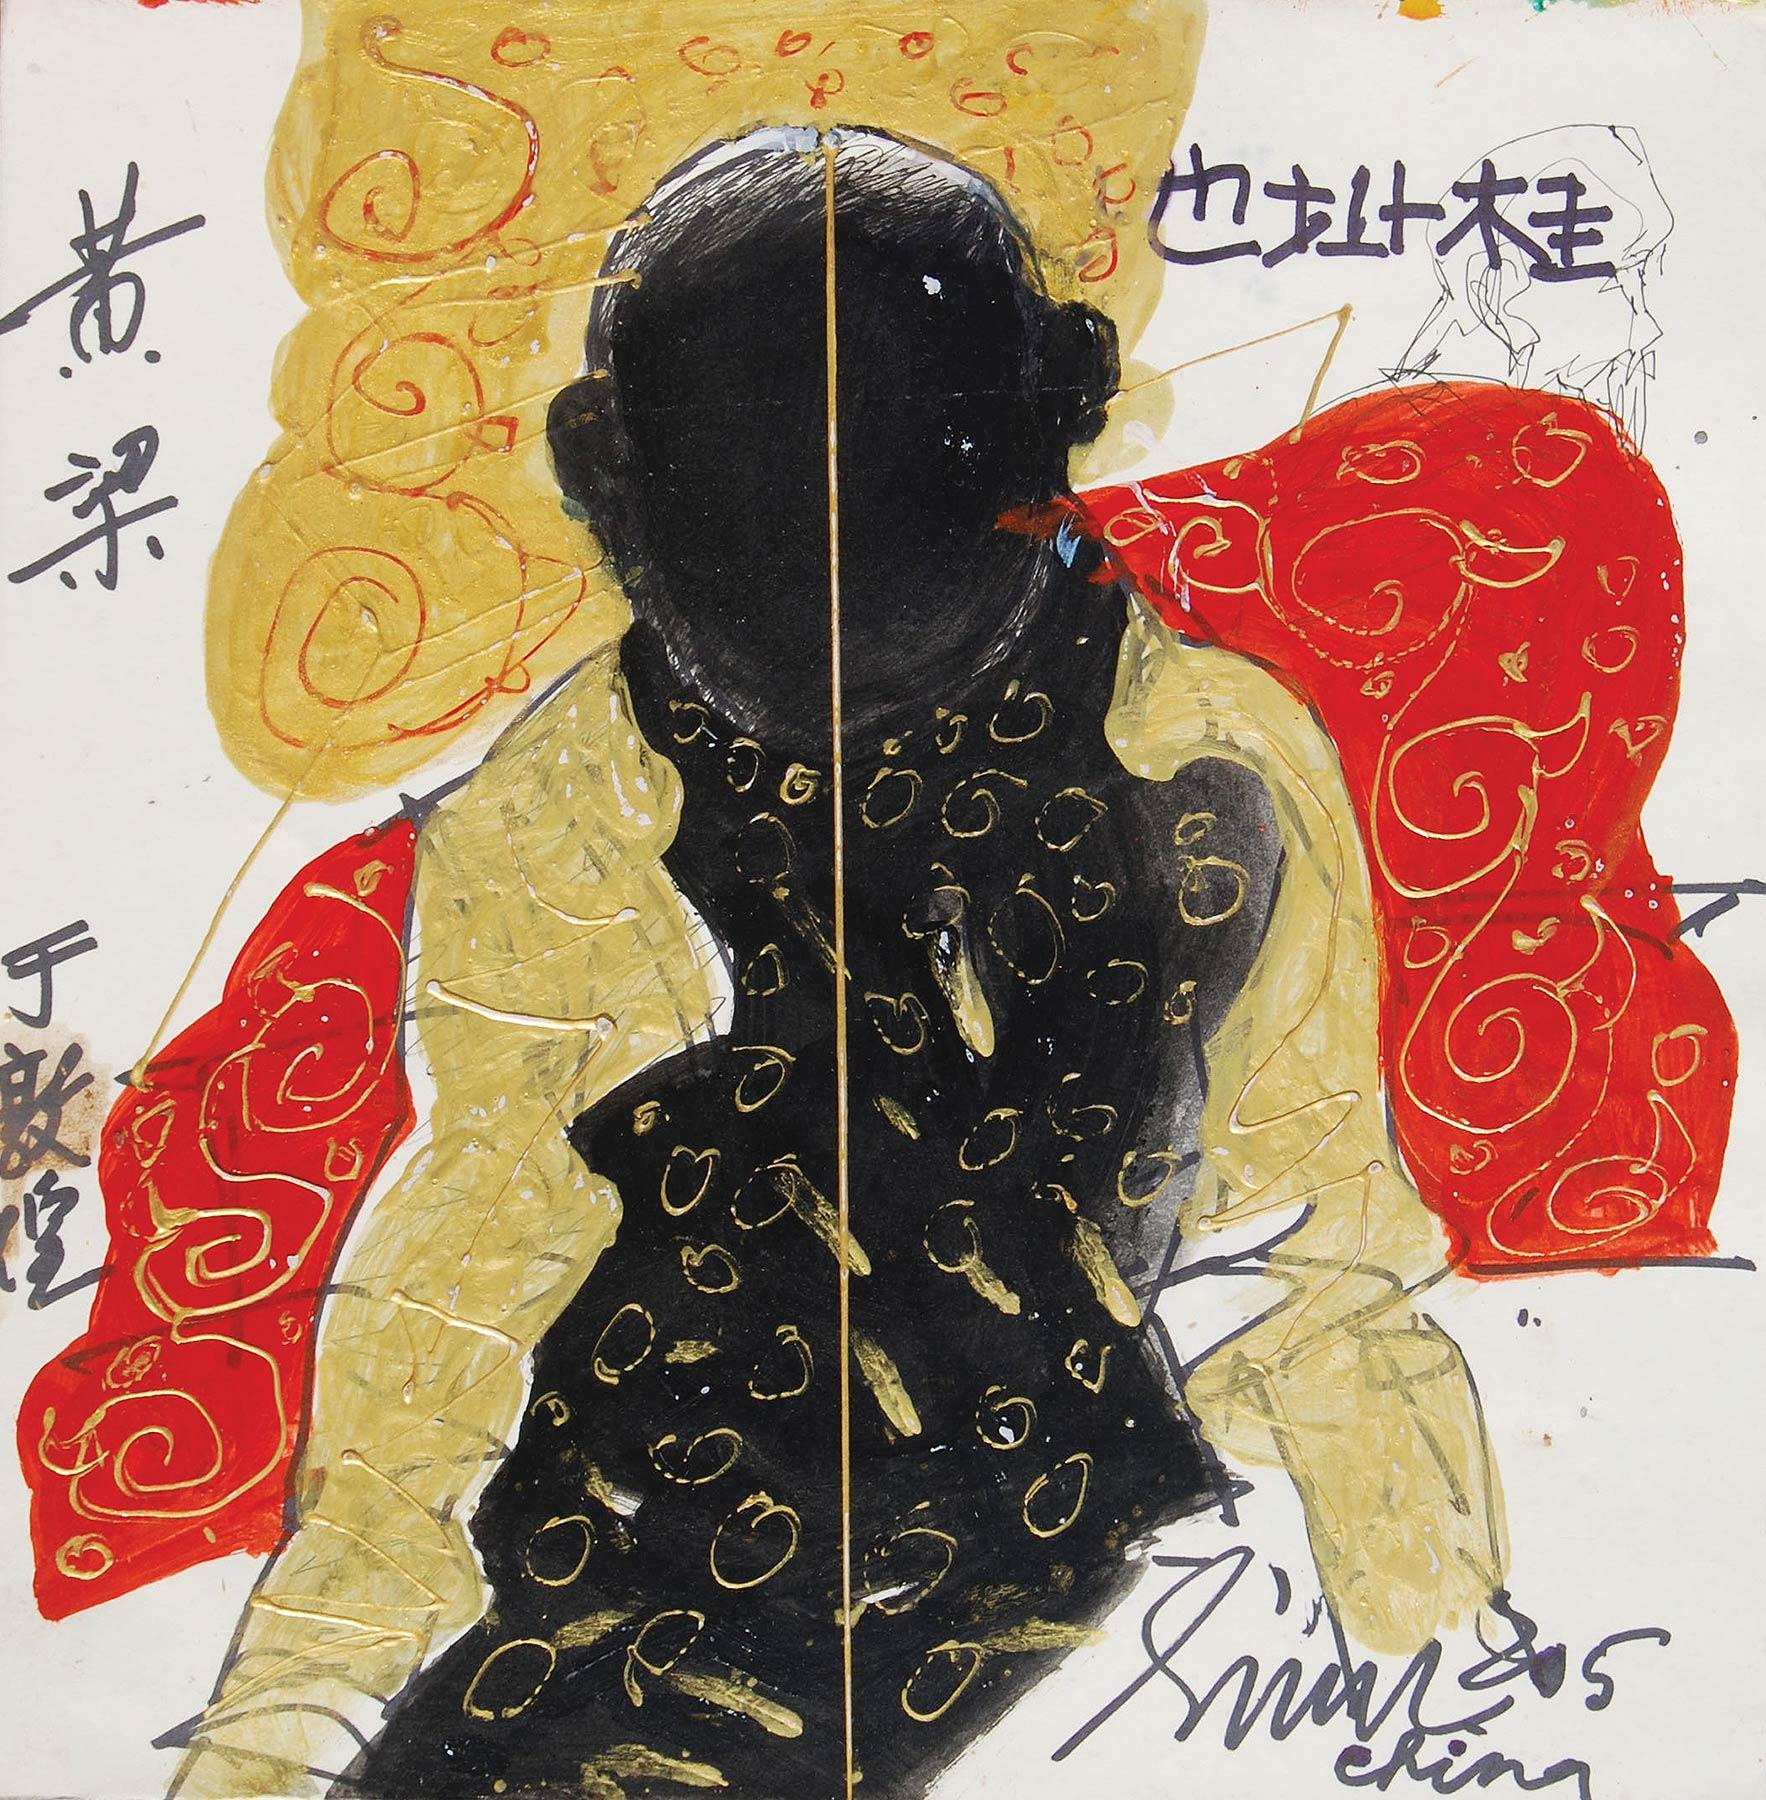 Chinese Man, Mixed Media on Paper, Red, Golden, Black by Master Artist"In Stock" - Mixed Media Art by Sunil Das